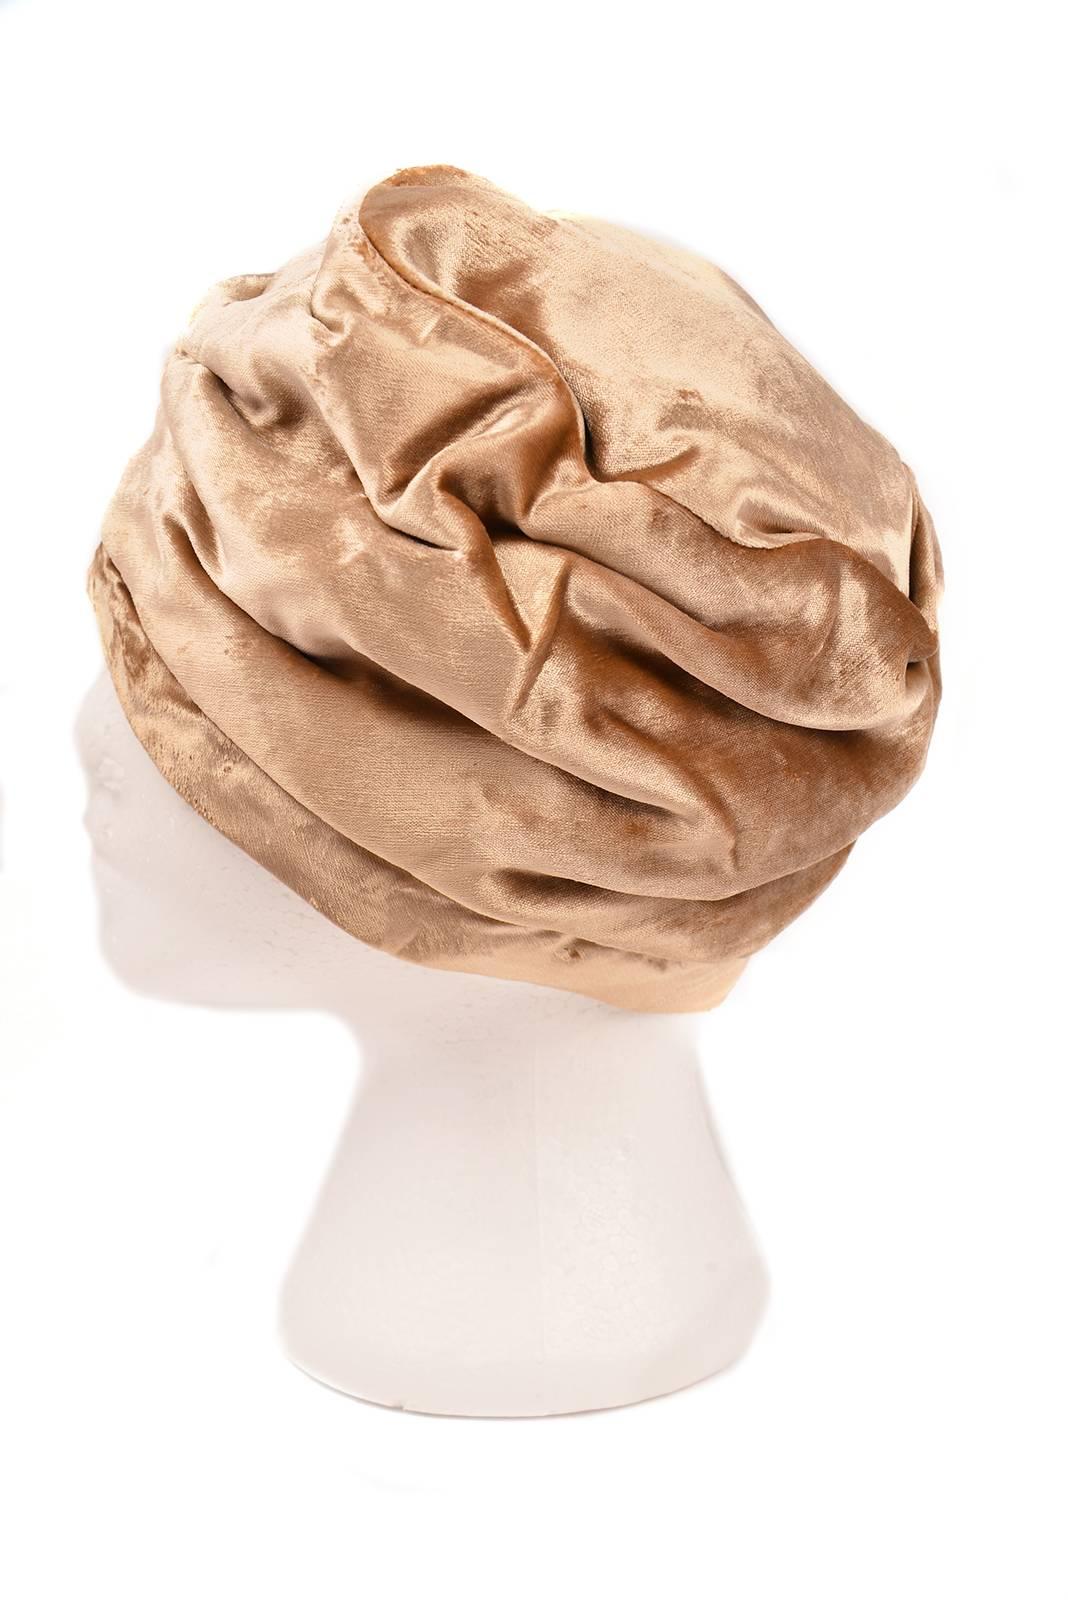 
Glamorous 1960s Mr. John turban style hat. This beautiful vintage hat is composed of champagne velvet folded into a undulating, organic, turban shape. The soft, wave-like construction of the hat pleats lend to its luxurious appearance. The hat is